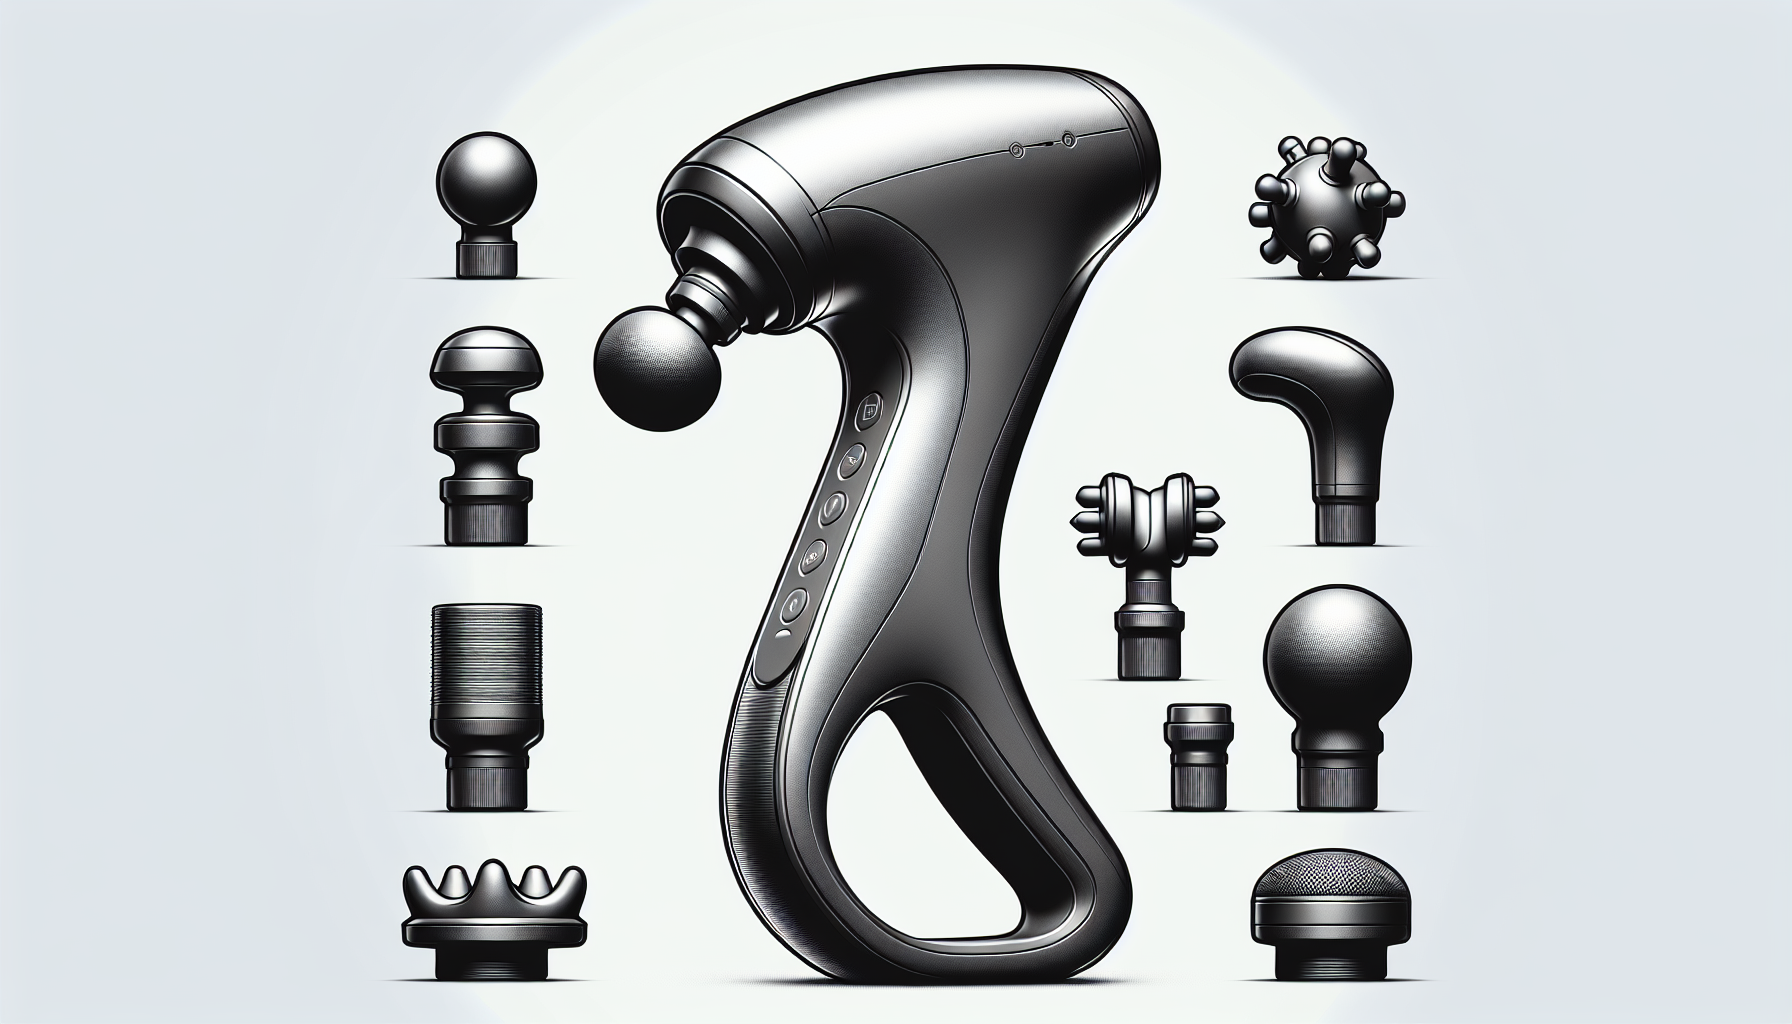 What Is Best Brand Of Handheld Massager?